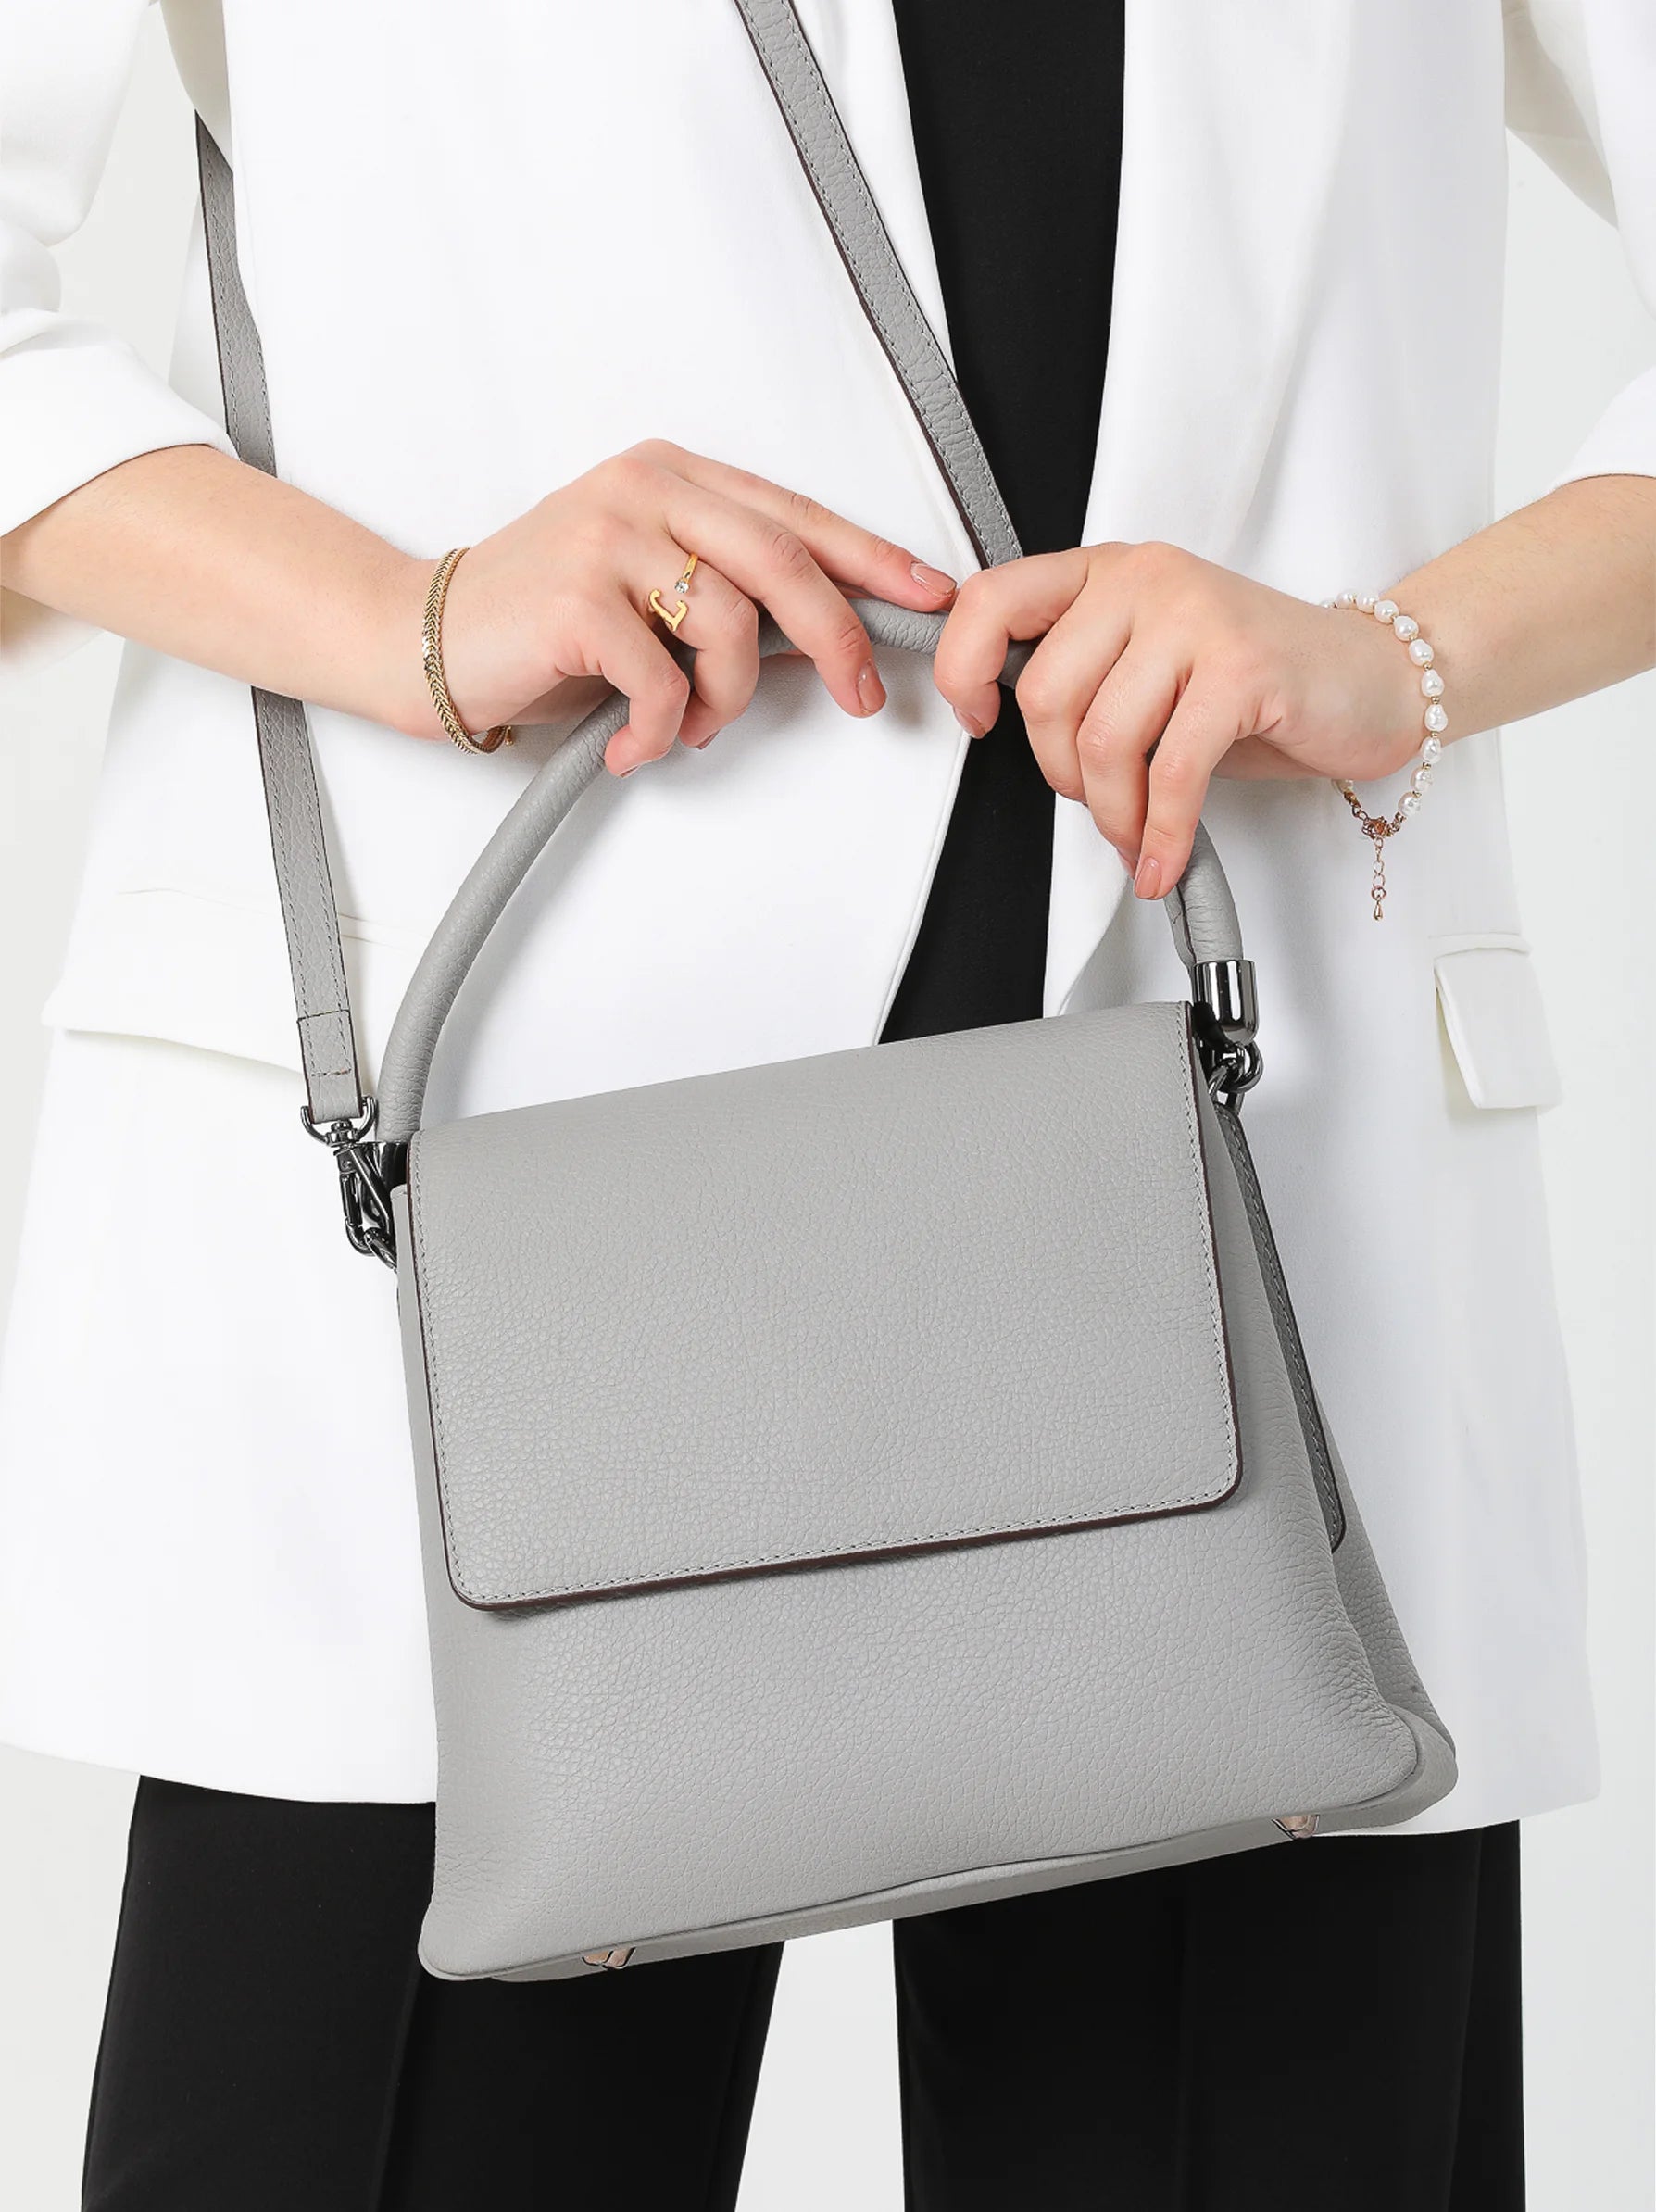 6 Handbags Every Woman Should Own